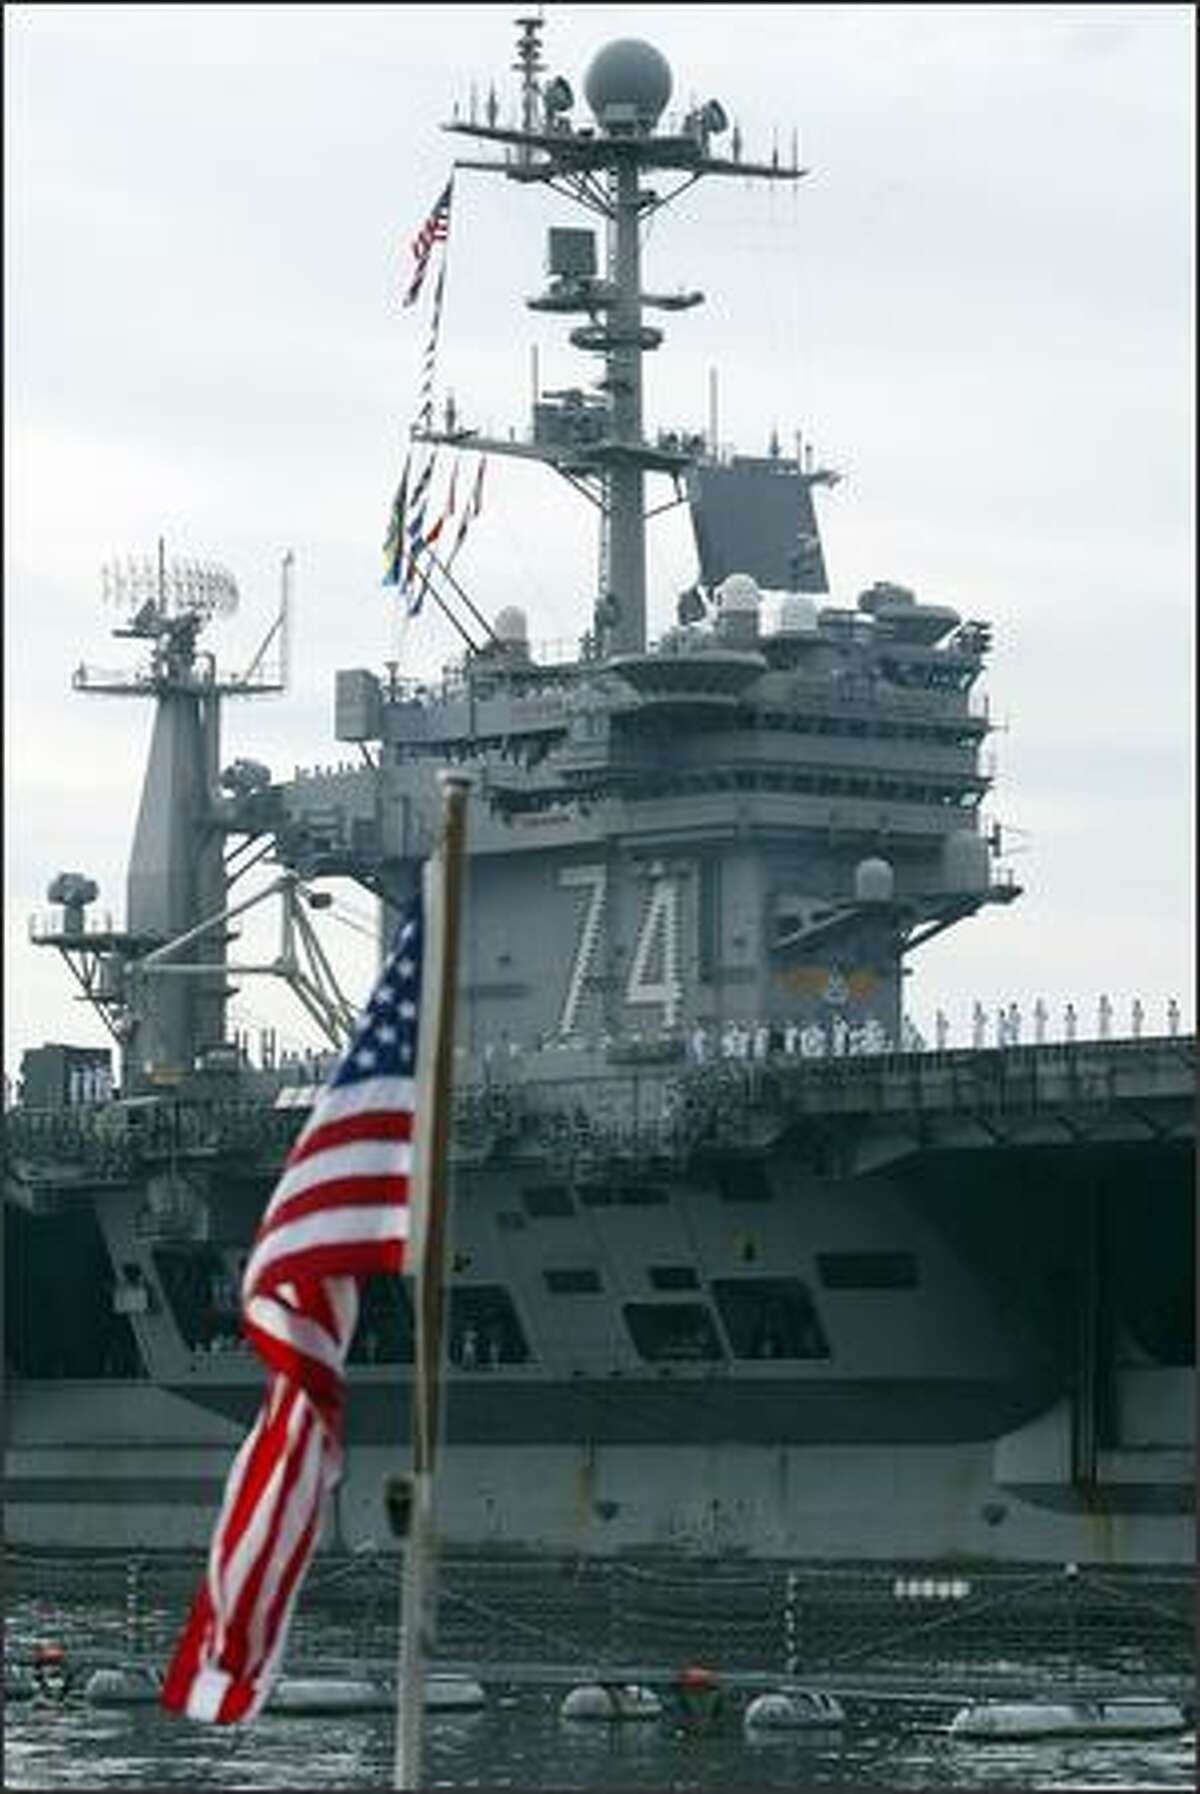 The superstructure of the USS Stennis passes before the flag on the submarine USS Seawolf at the Naval Base Kitsap in Bremerton, Wash., Friday August 31, 2007. The Stennis returned to its home port after a half-year deployment in the waters of the Middle East in support of the fighting in Afghanistan and Iraq.